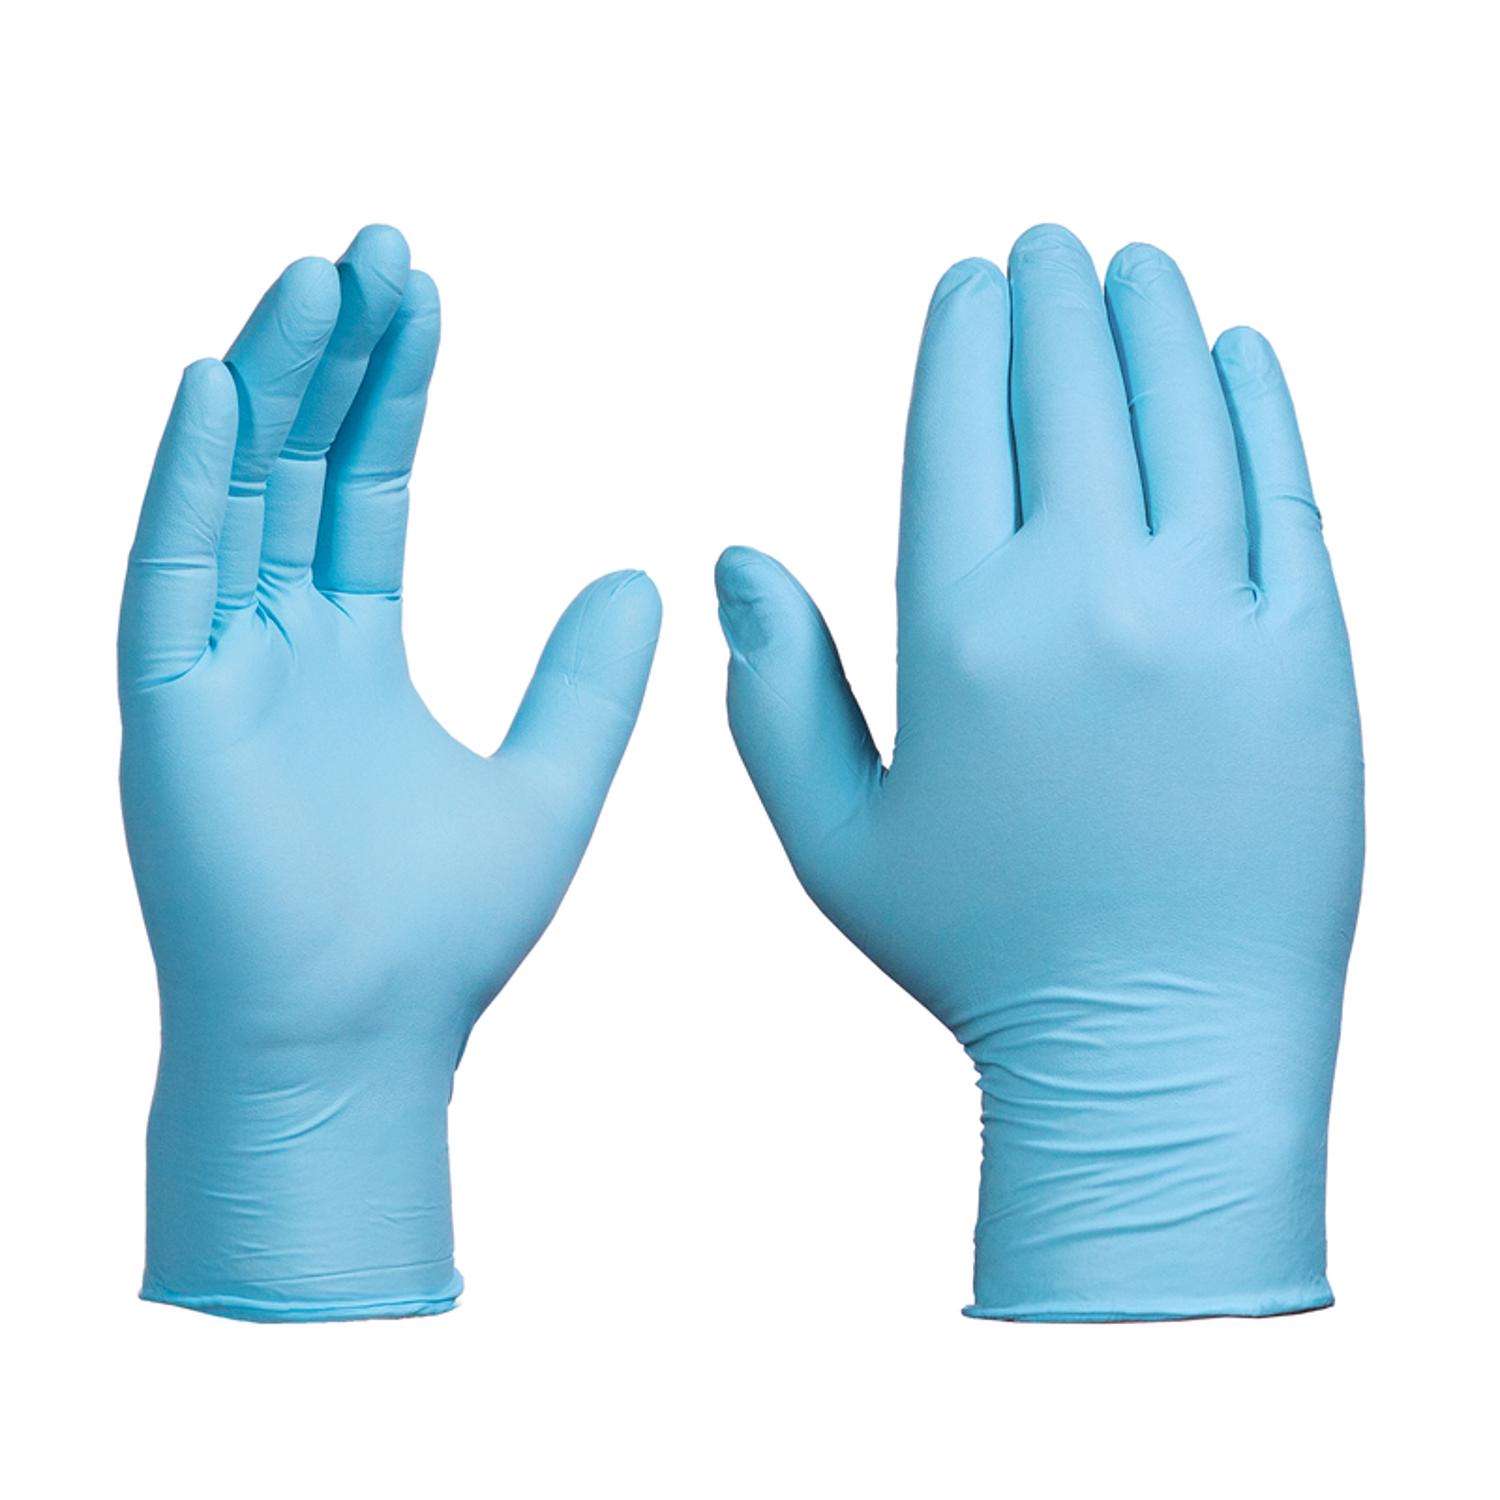 Gloveworks 100-Count X-large Nitrile Disposable Cleaning Gloves in